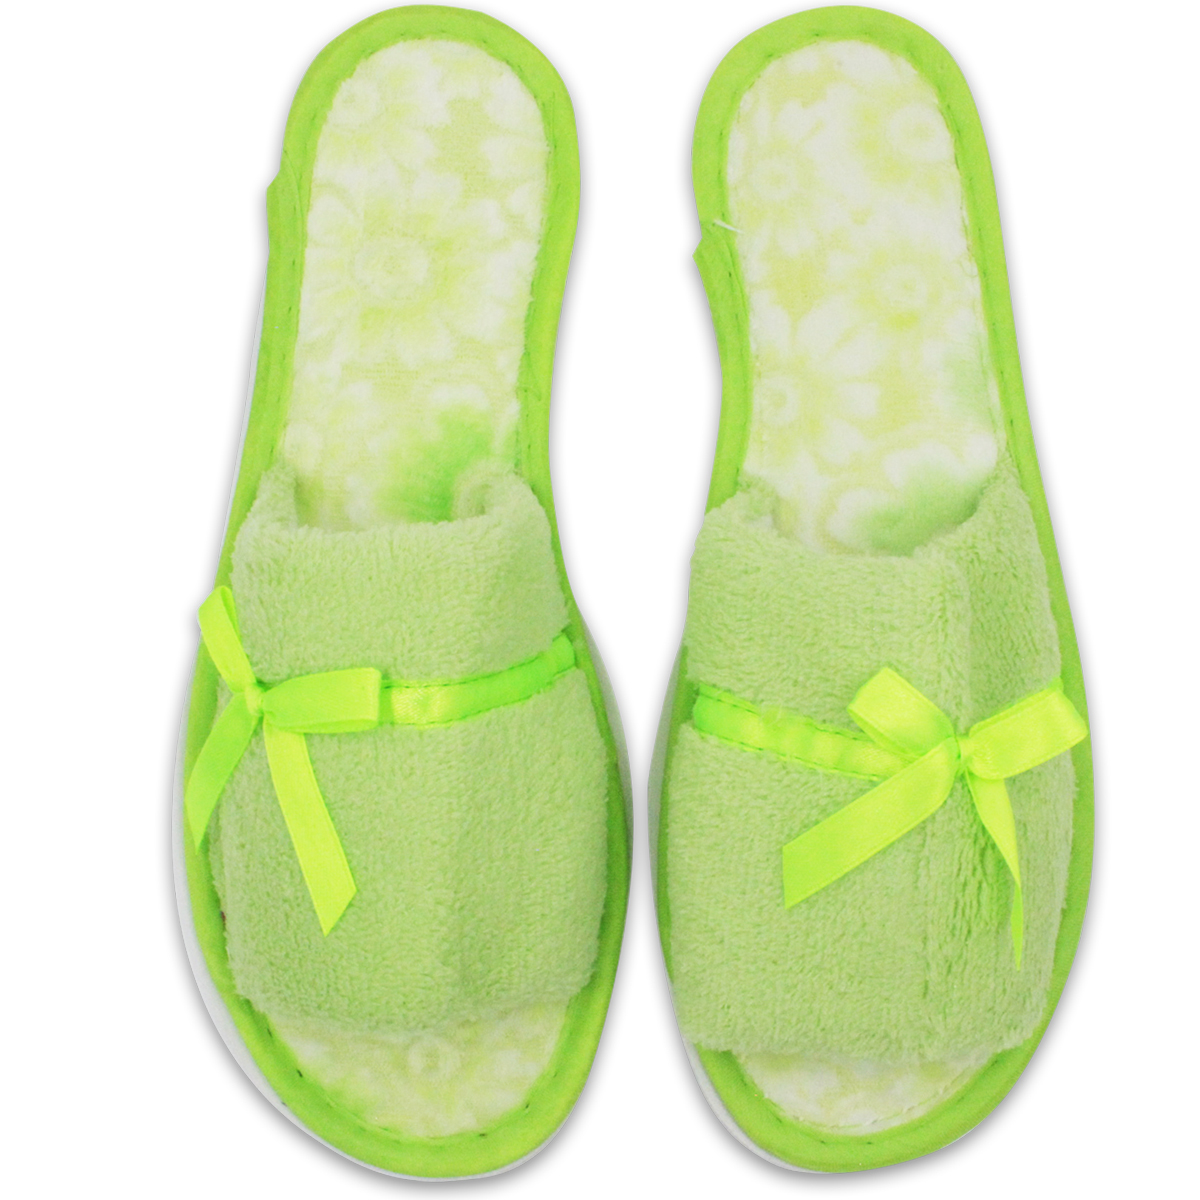 Women's Plush Open Toe Slippers Soft Comfy Terry Cloth House Shoes | eBay